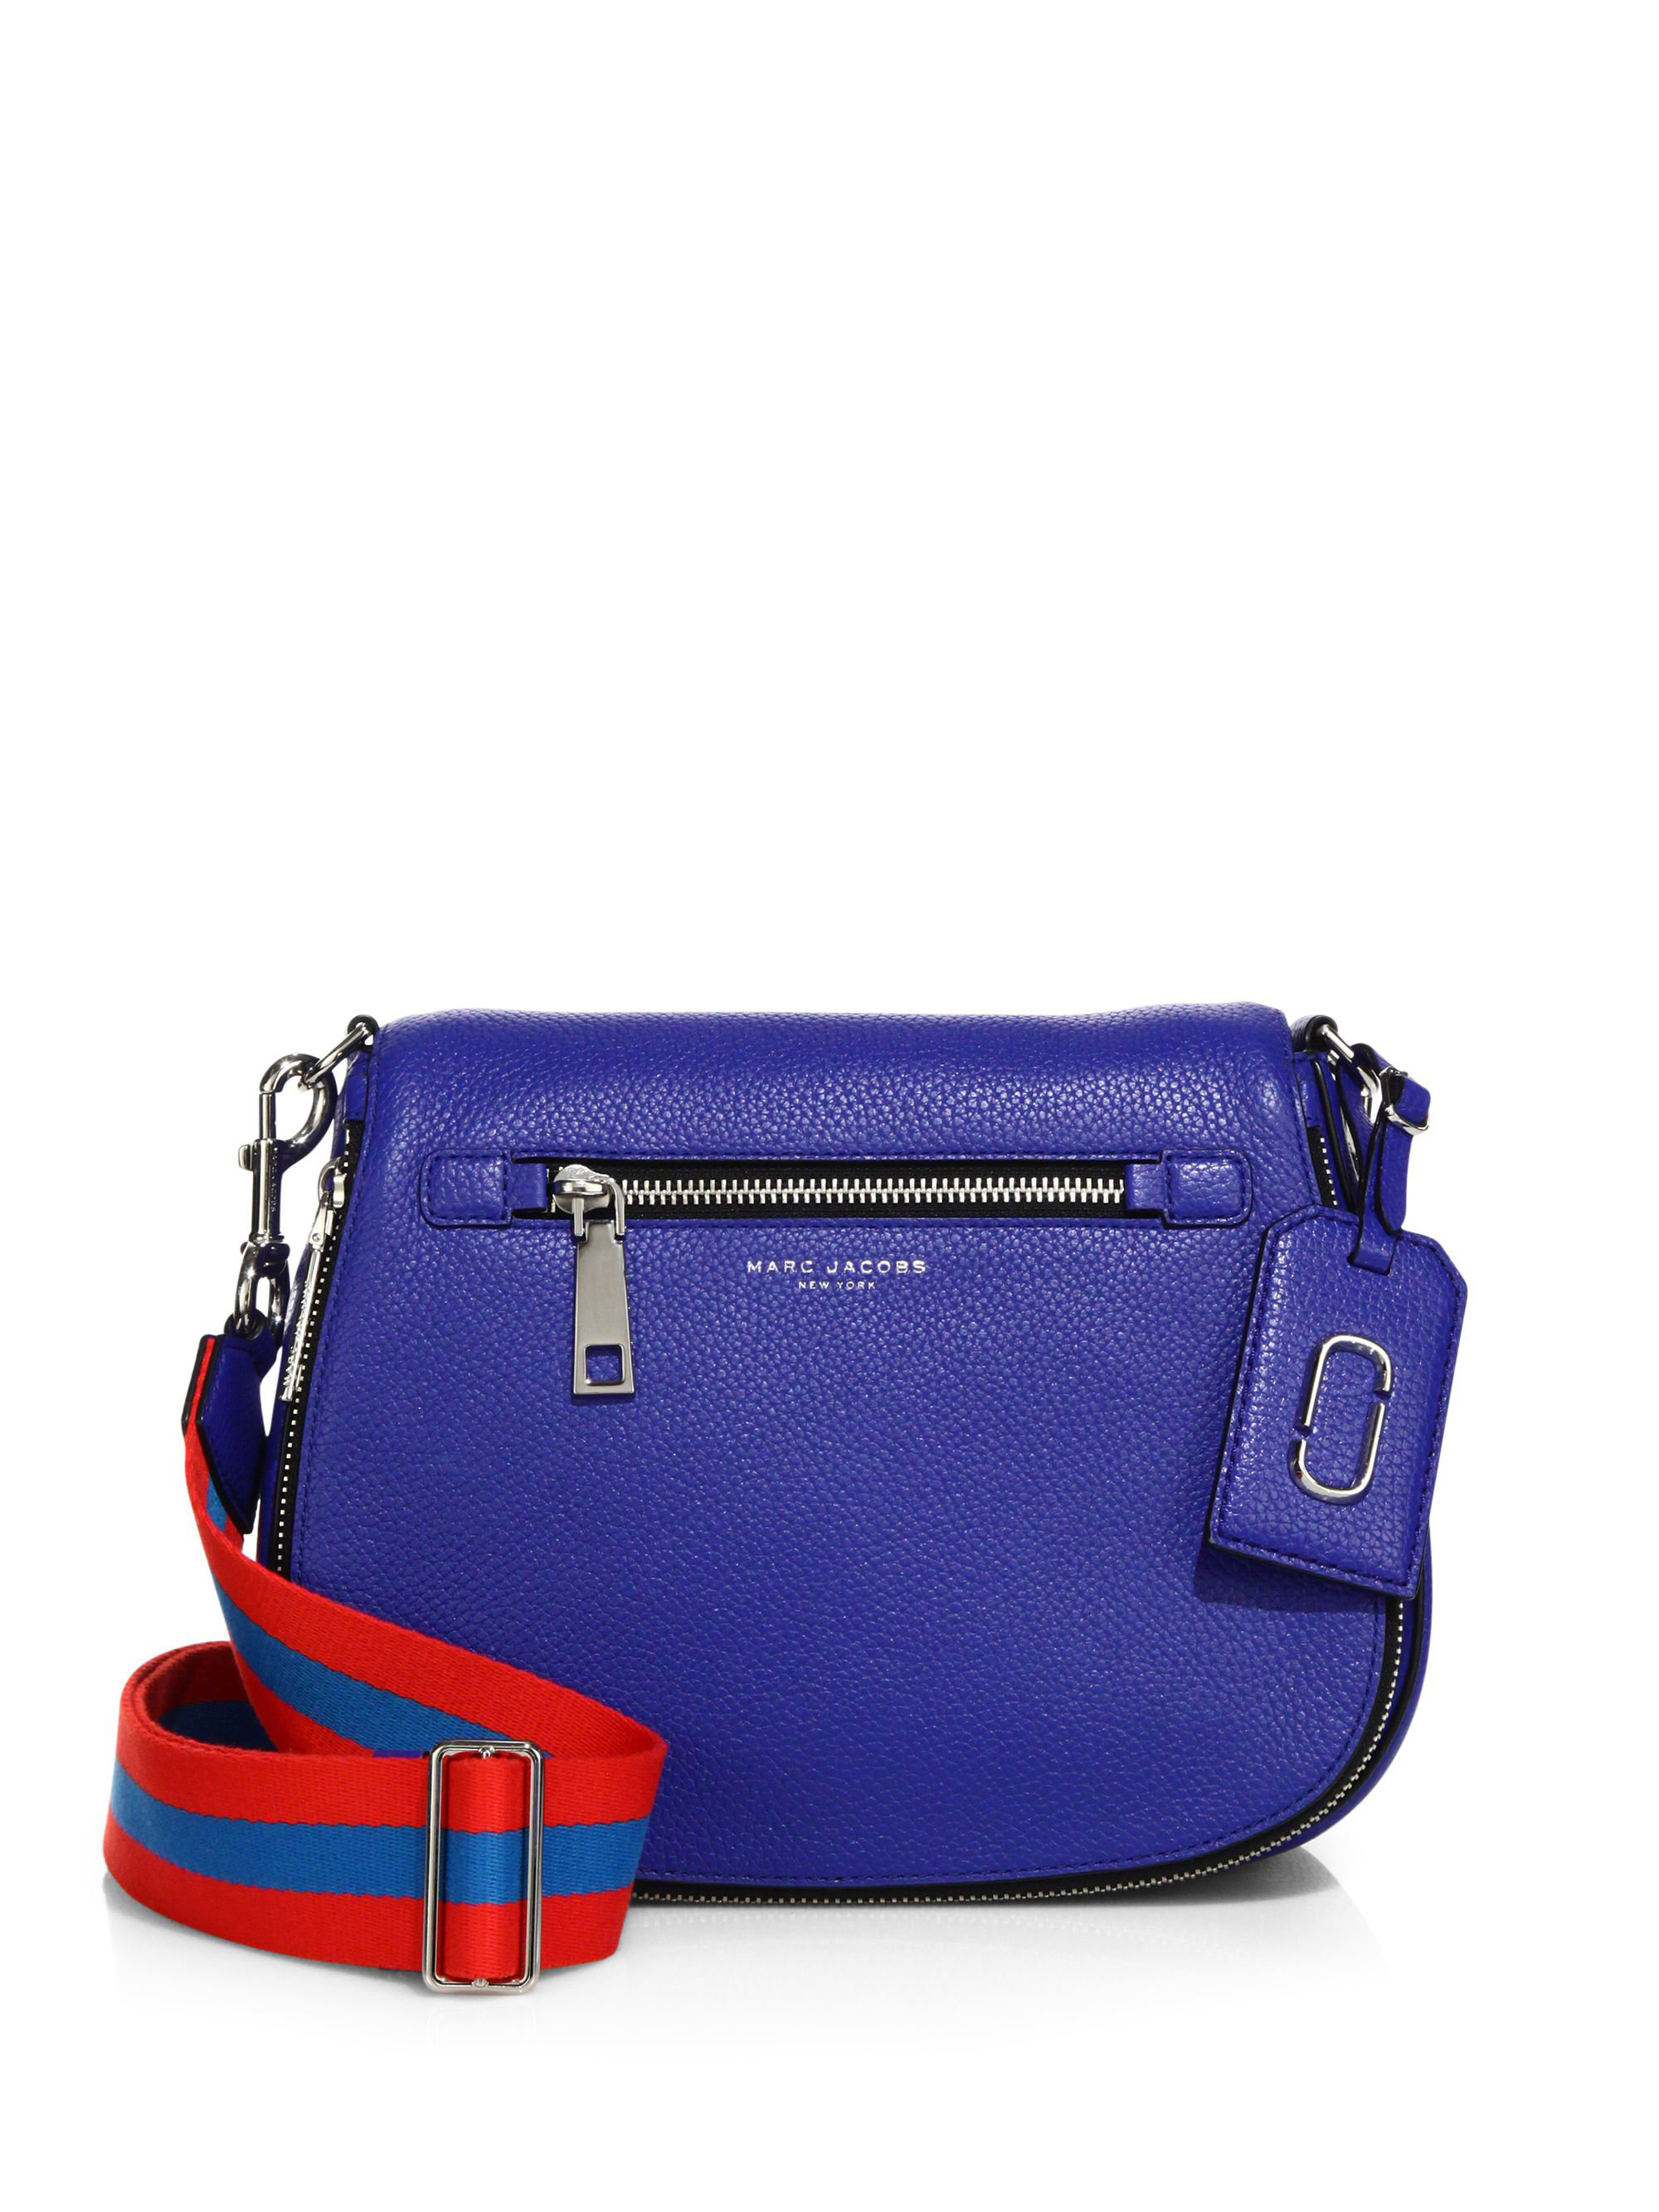 Lyst - Marc Jacobs Gotham Leather Saddle Bag in Blue